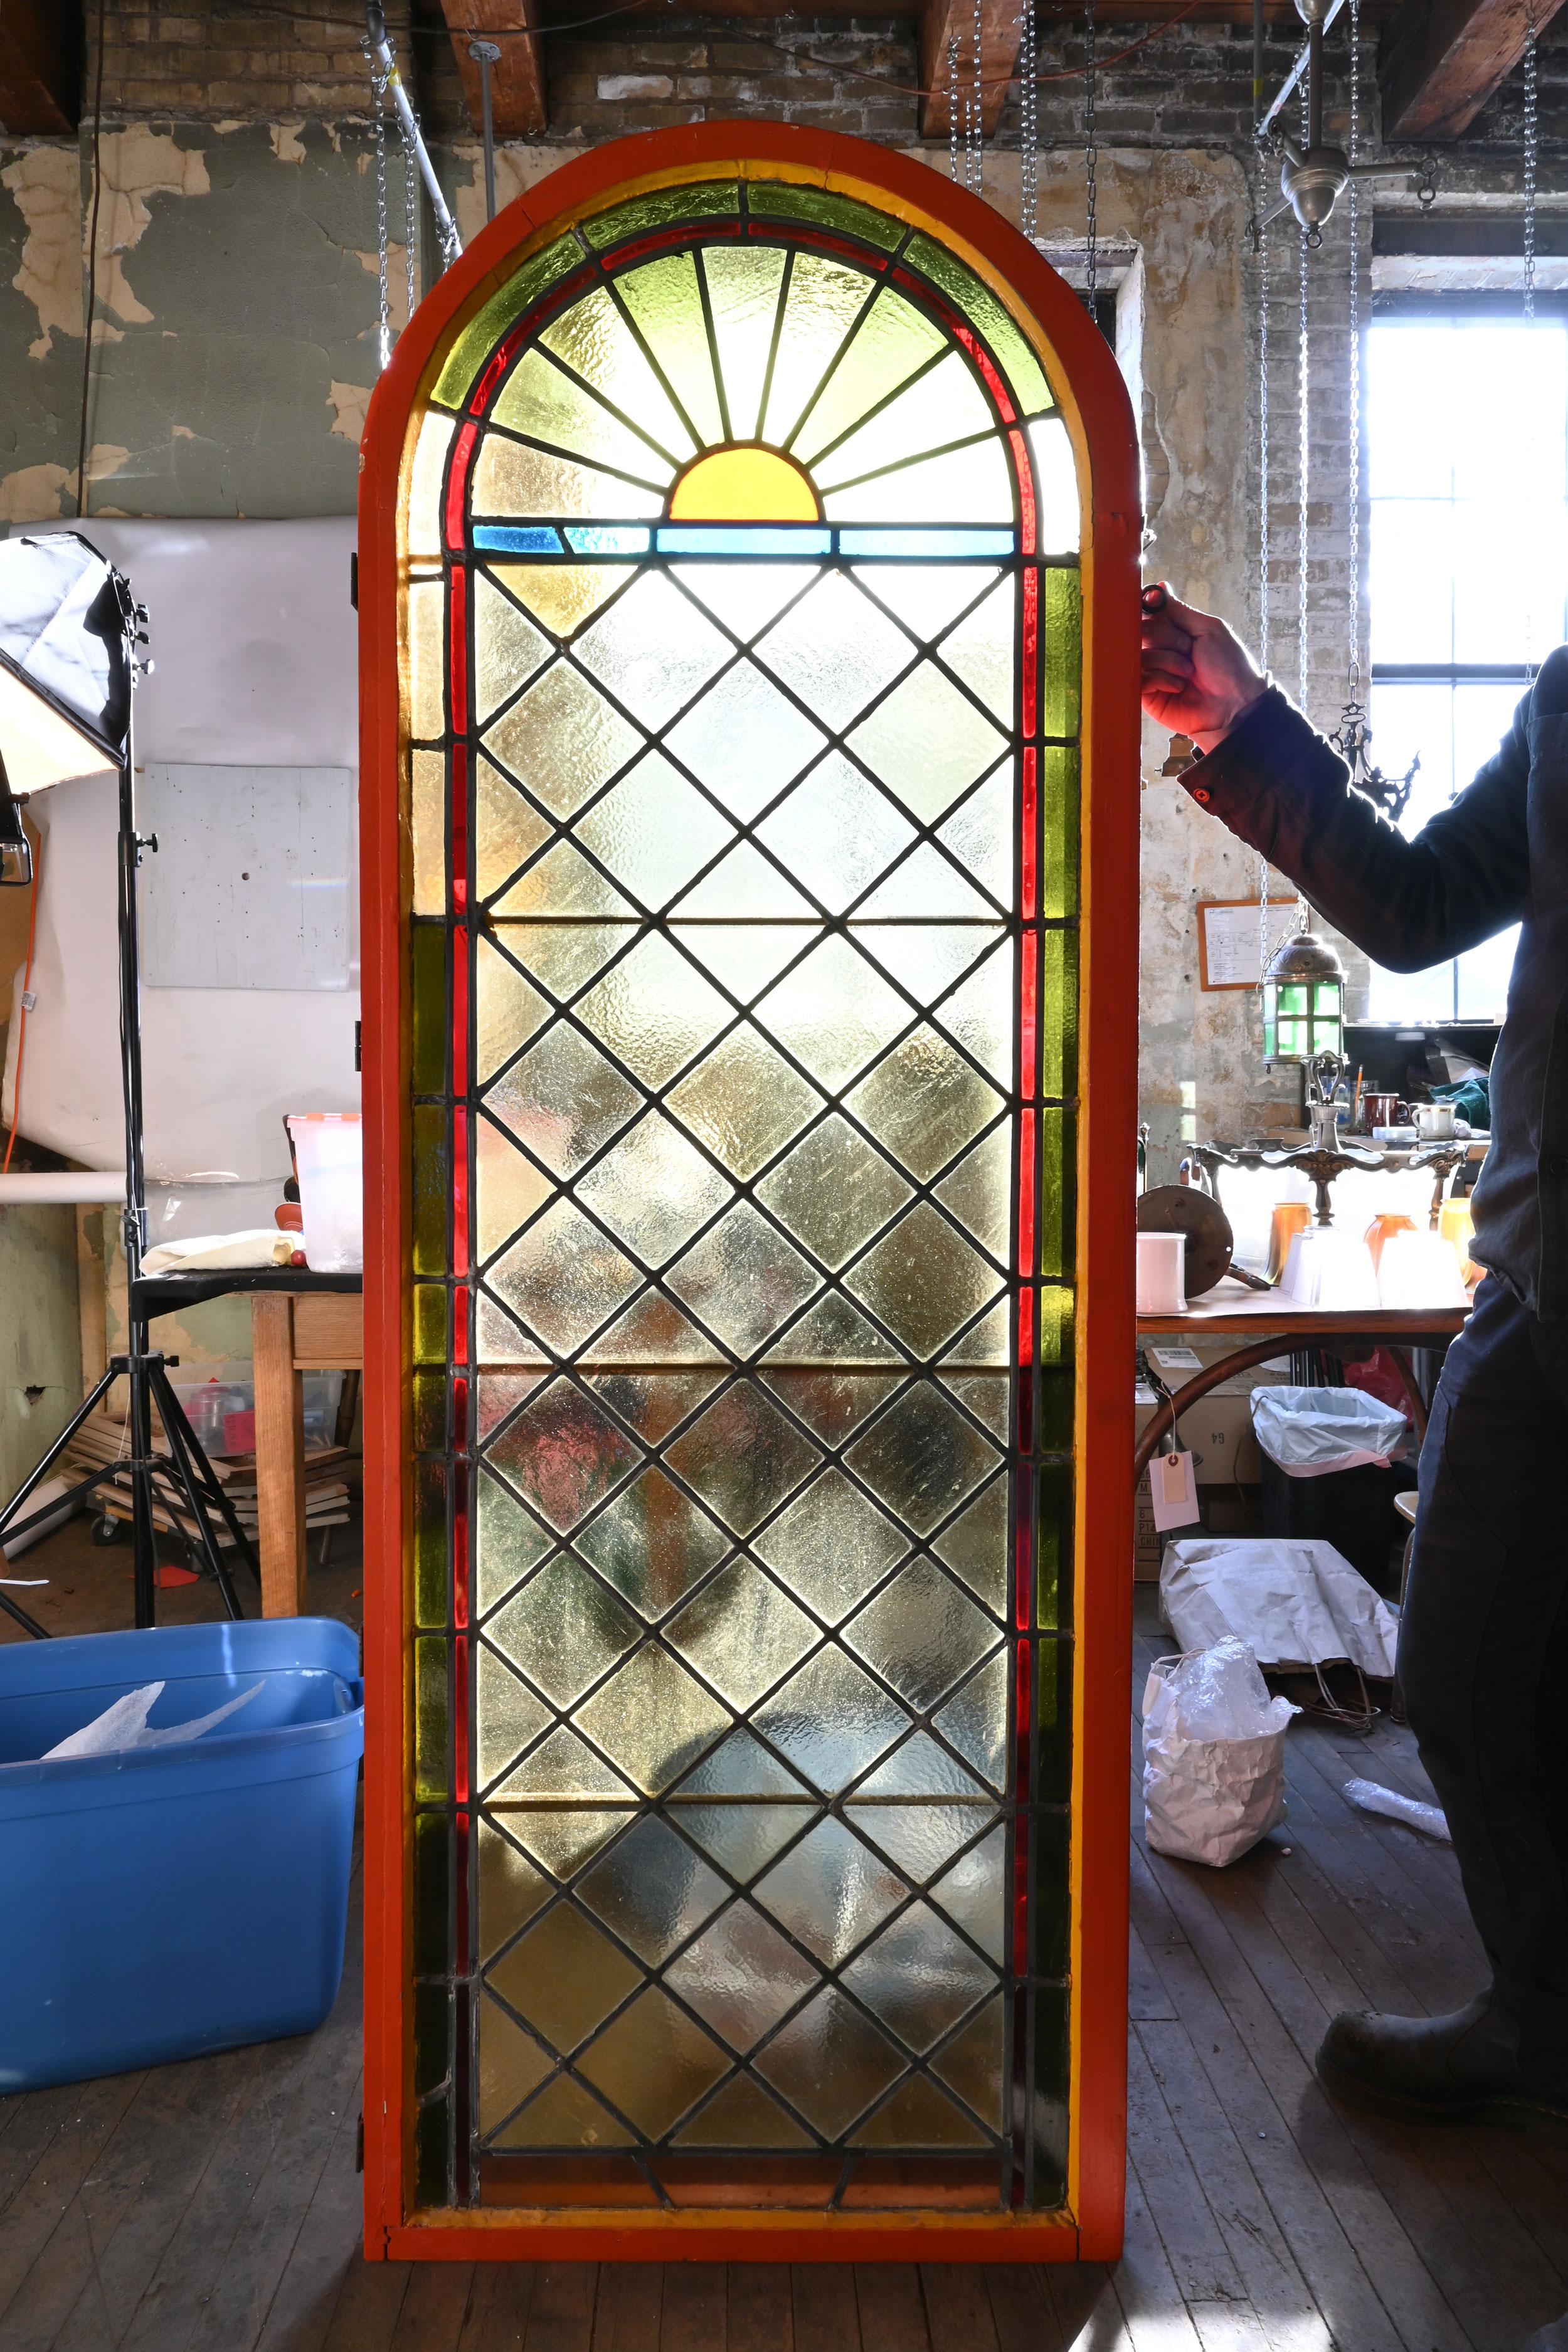 stained glass window template